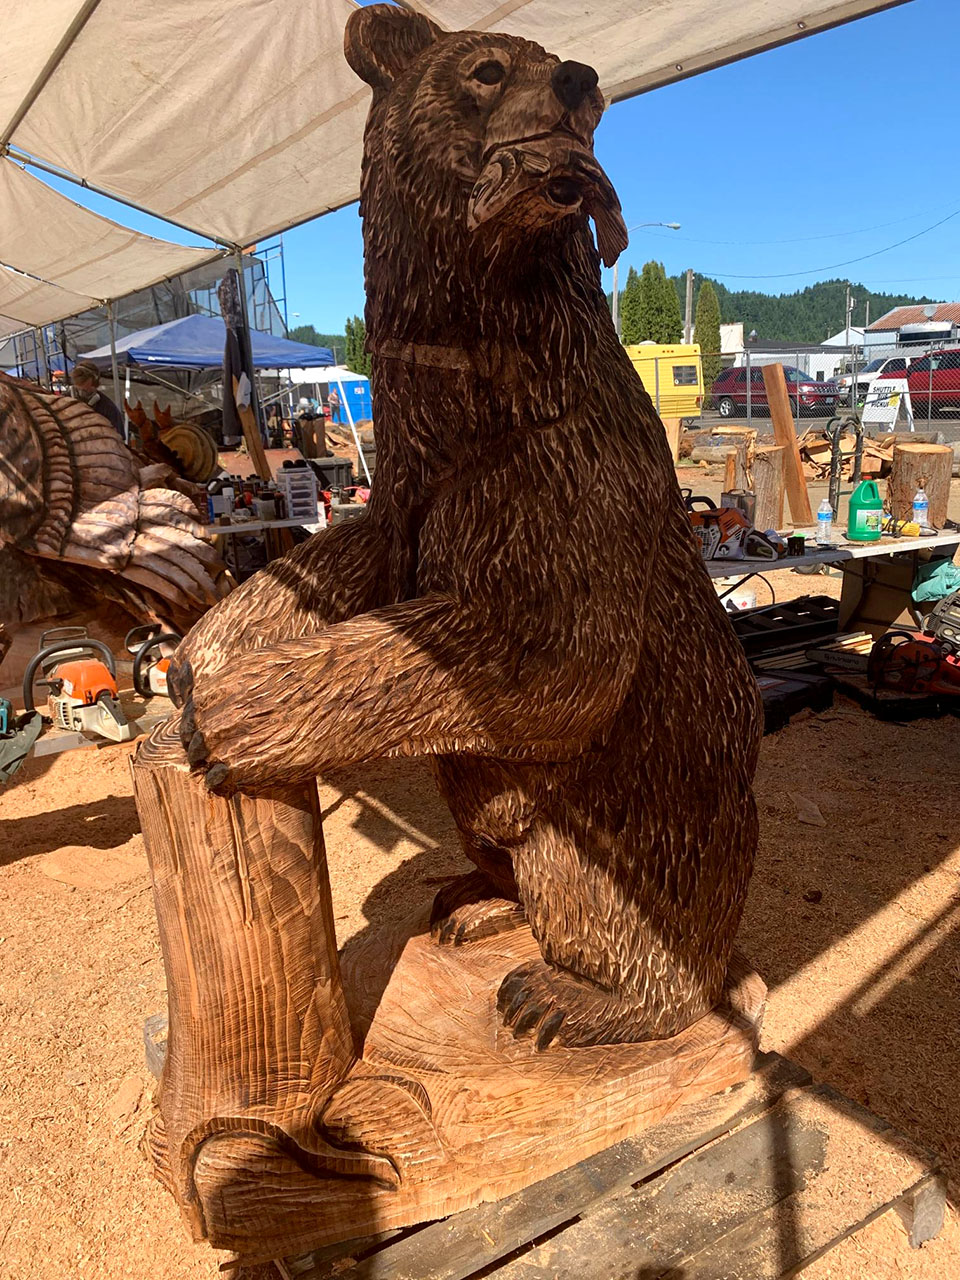 Chainsaw carving of bear with salmon at the Oregon Divisional Chainsaw Carving Championship in Reedsport, Oregon